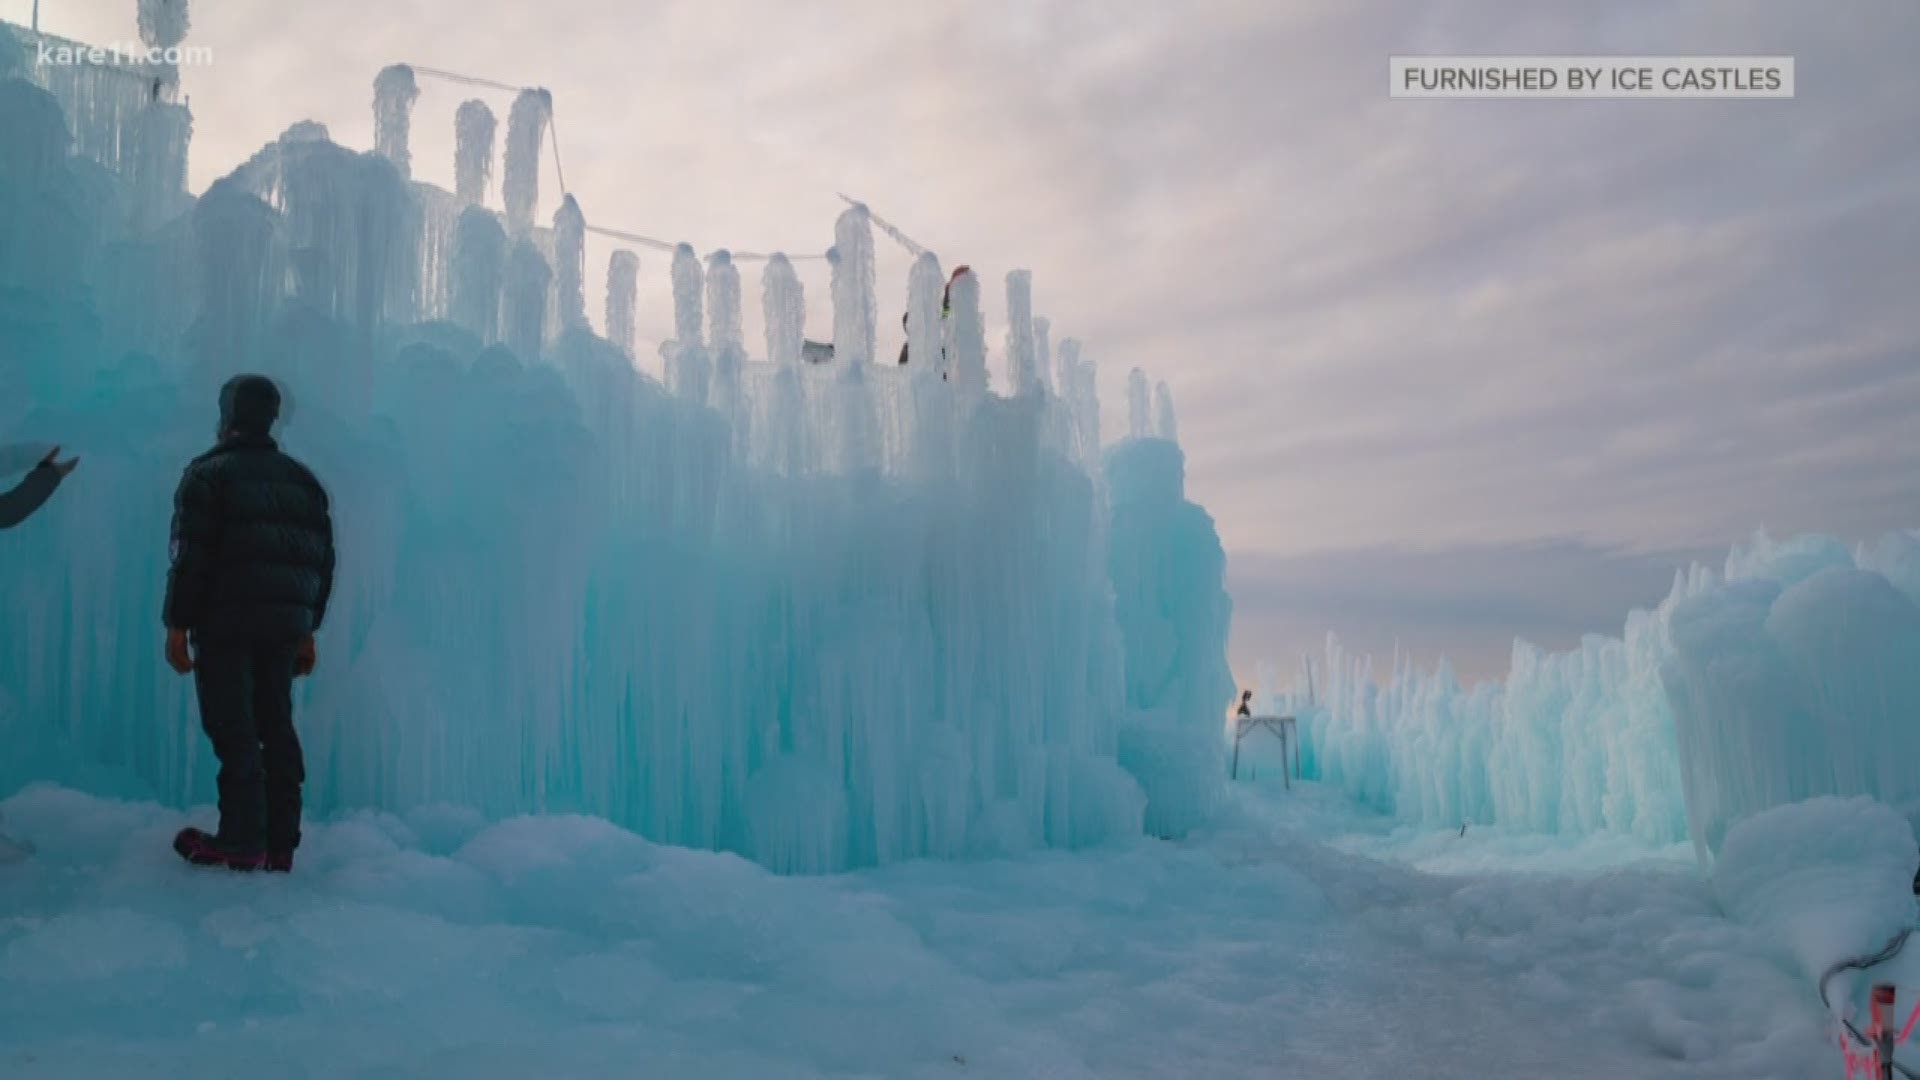 The Ice Castles are opening at 6:30 p.m. in Excelsior 1-12-19.